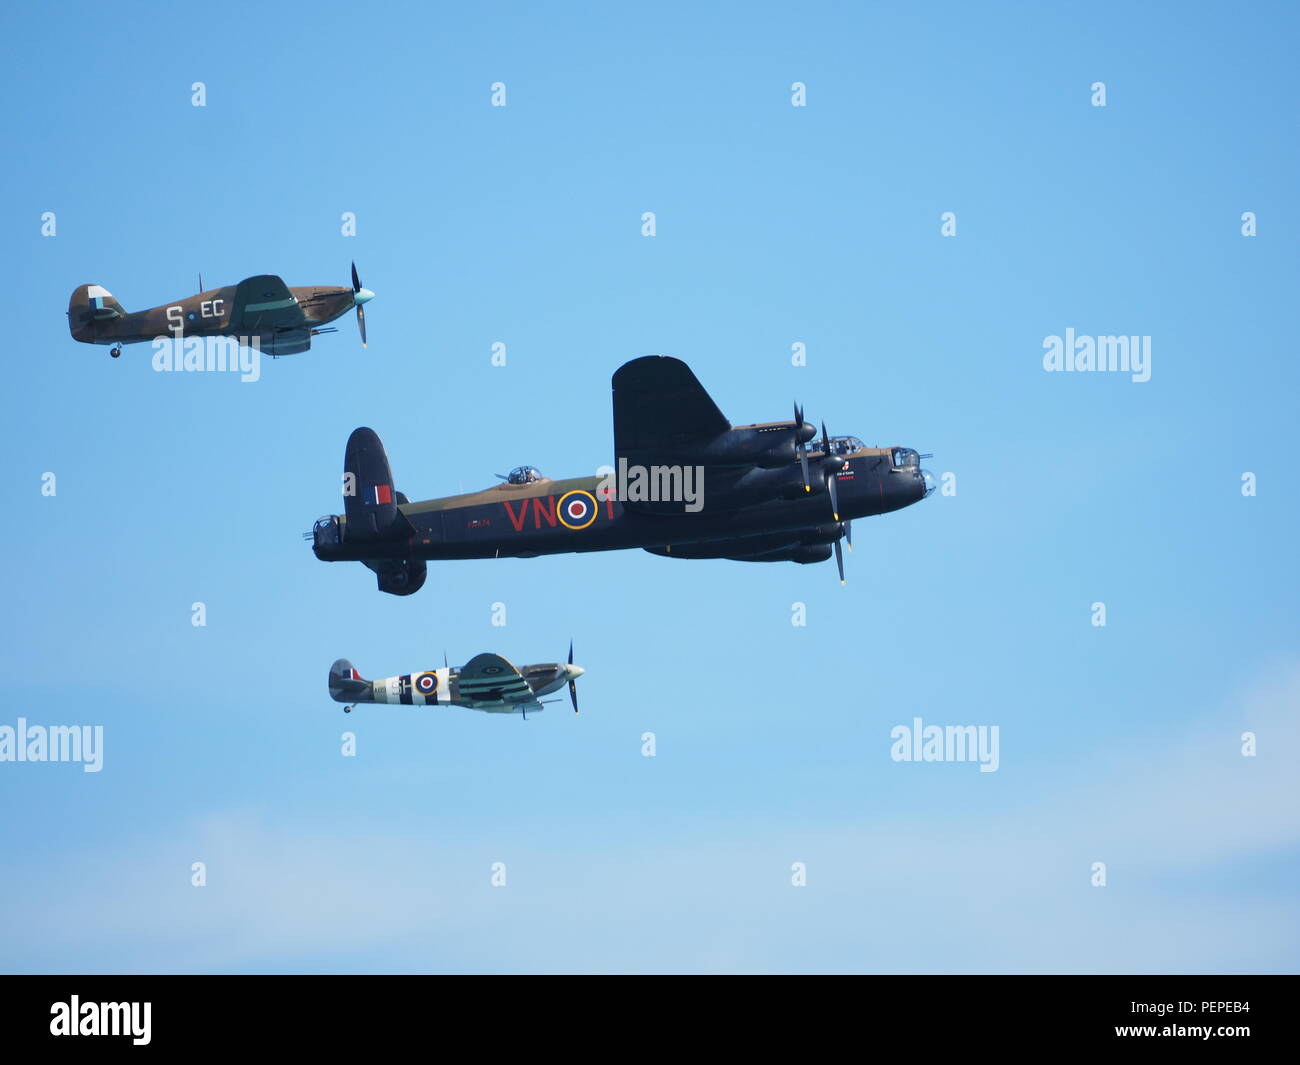 Eastbourne, UK. 17th Aug, 2018. Eastbourne Airshow: thousands lined Eastbourne seafront for day 2 of Eastbourne International Air Show in warm sunny weather. Pic: Battle of Britain Memorial Flight. Credit: James Bell/Alamy Live News Stock Photo